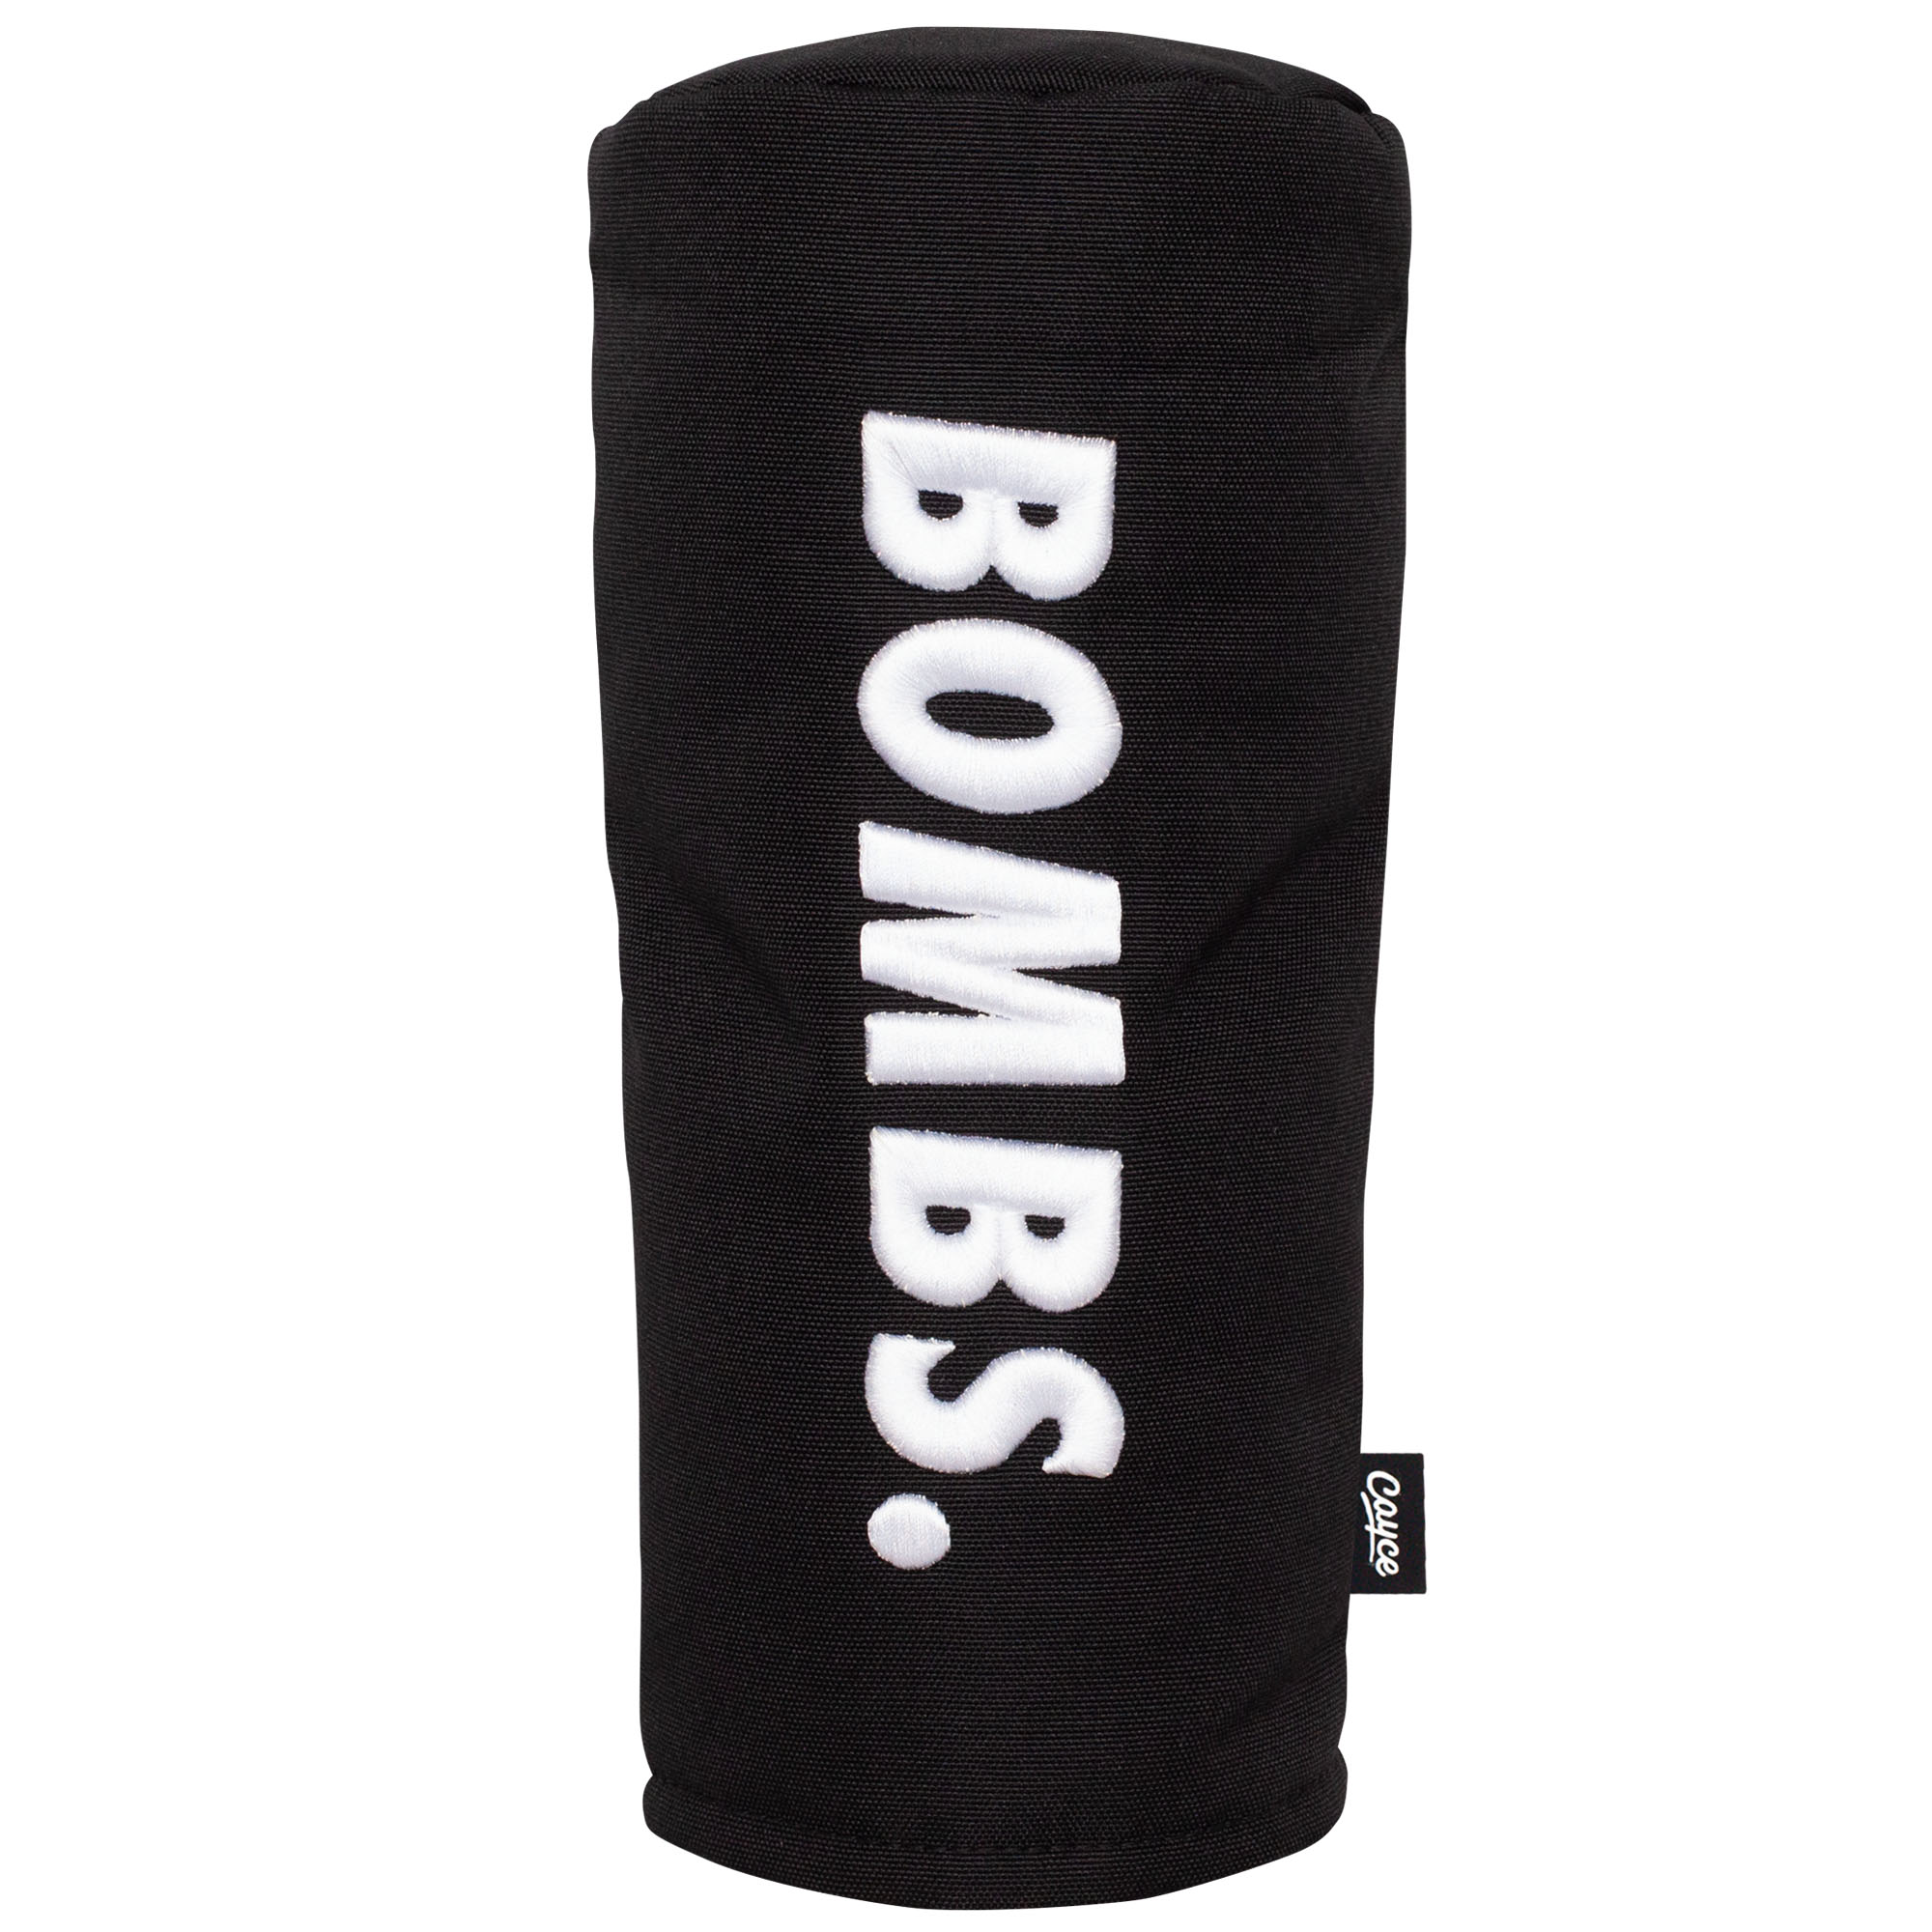 black, 900D barrel shaped driver headcover with 3D puff embroidery on each side saying "BOMBS." in white thread